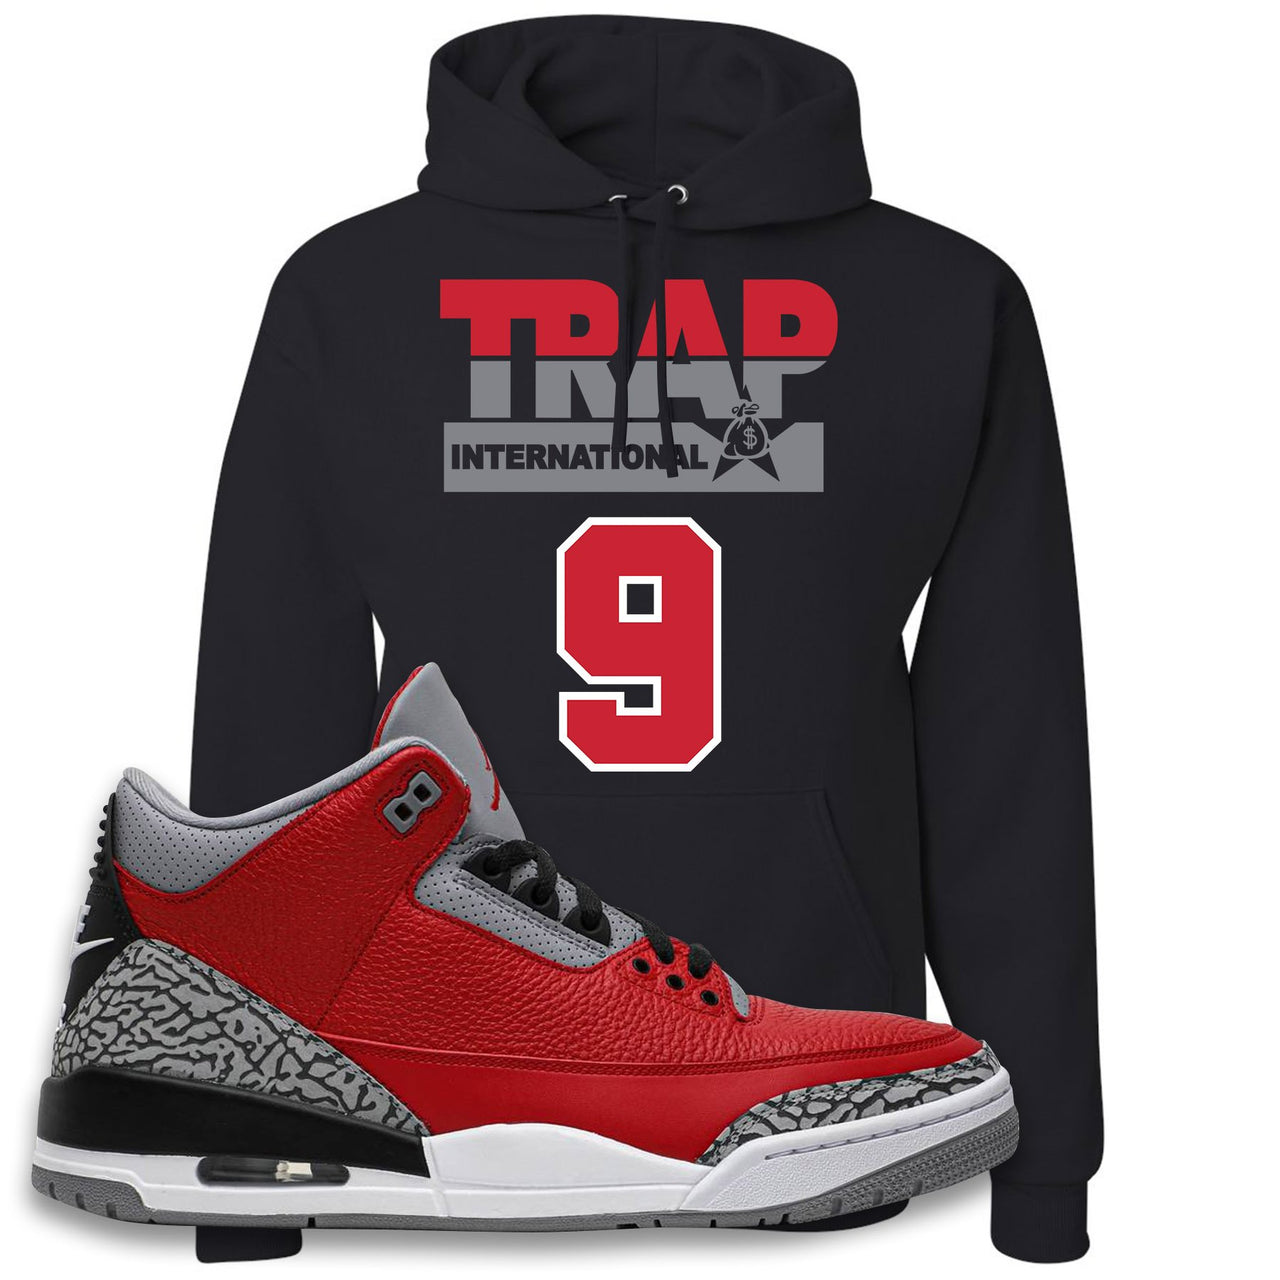 Jordan 3 Red Cement Chicago All-Star Sneaker Black Pullover Hoodie | Hoodie to match Jordan 3 All Star Red Cement Shoes | Trap International